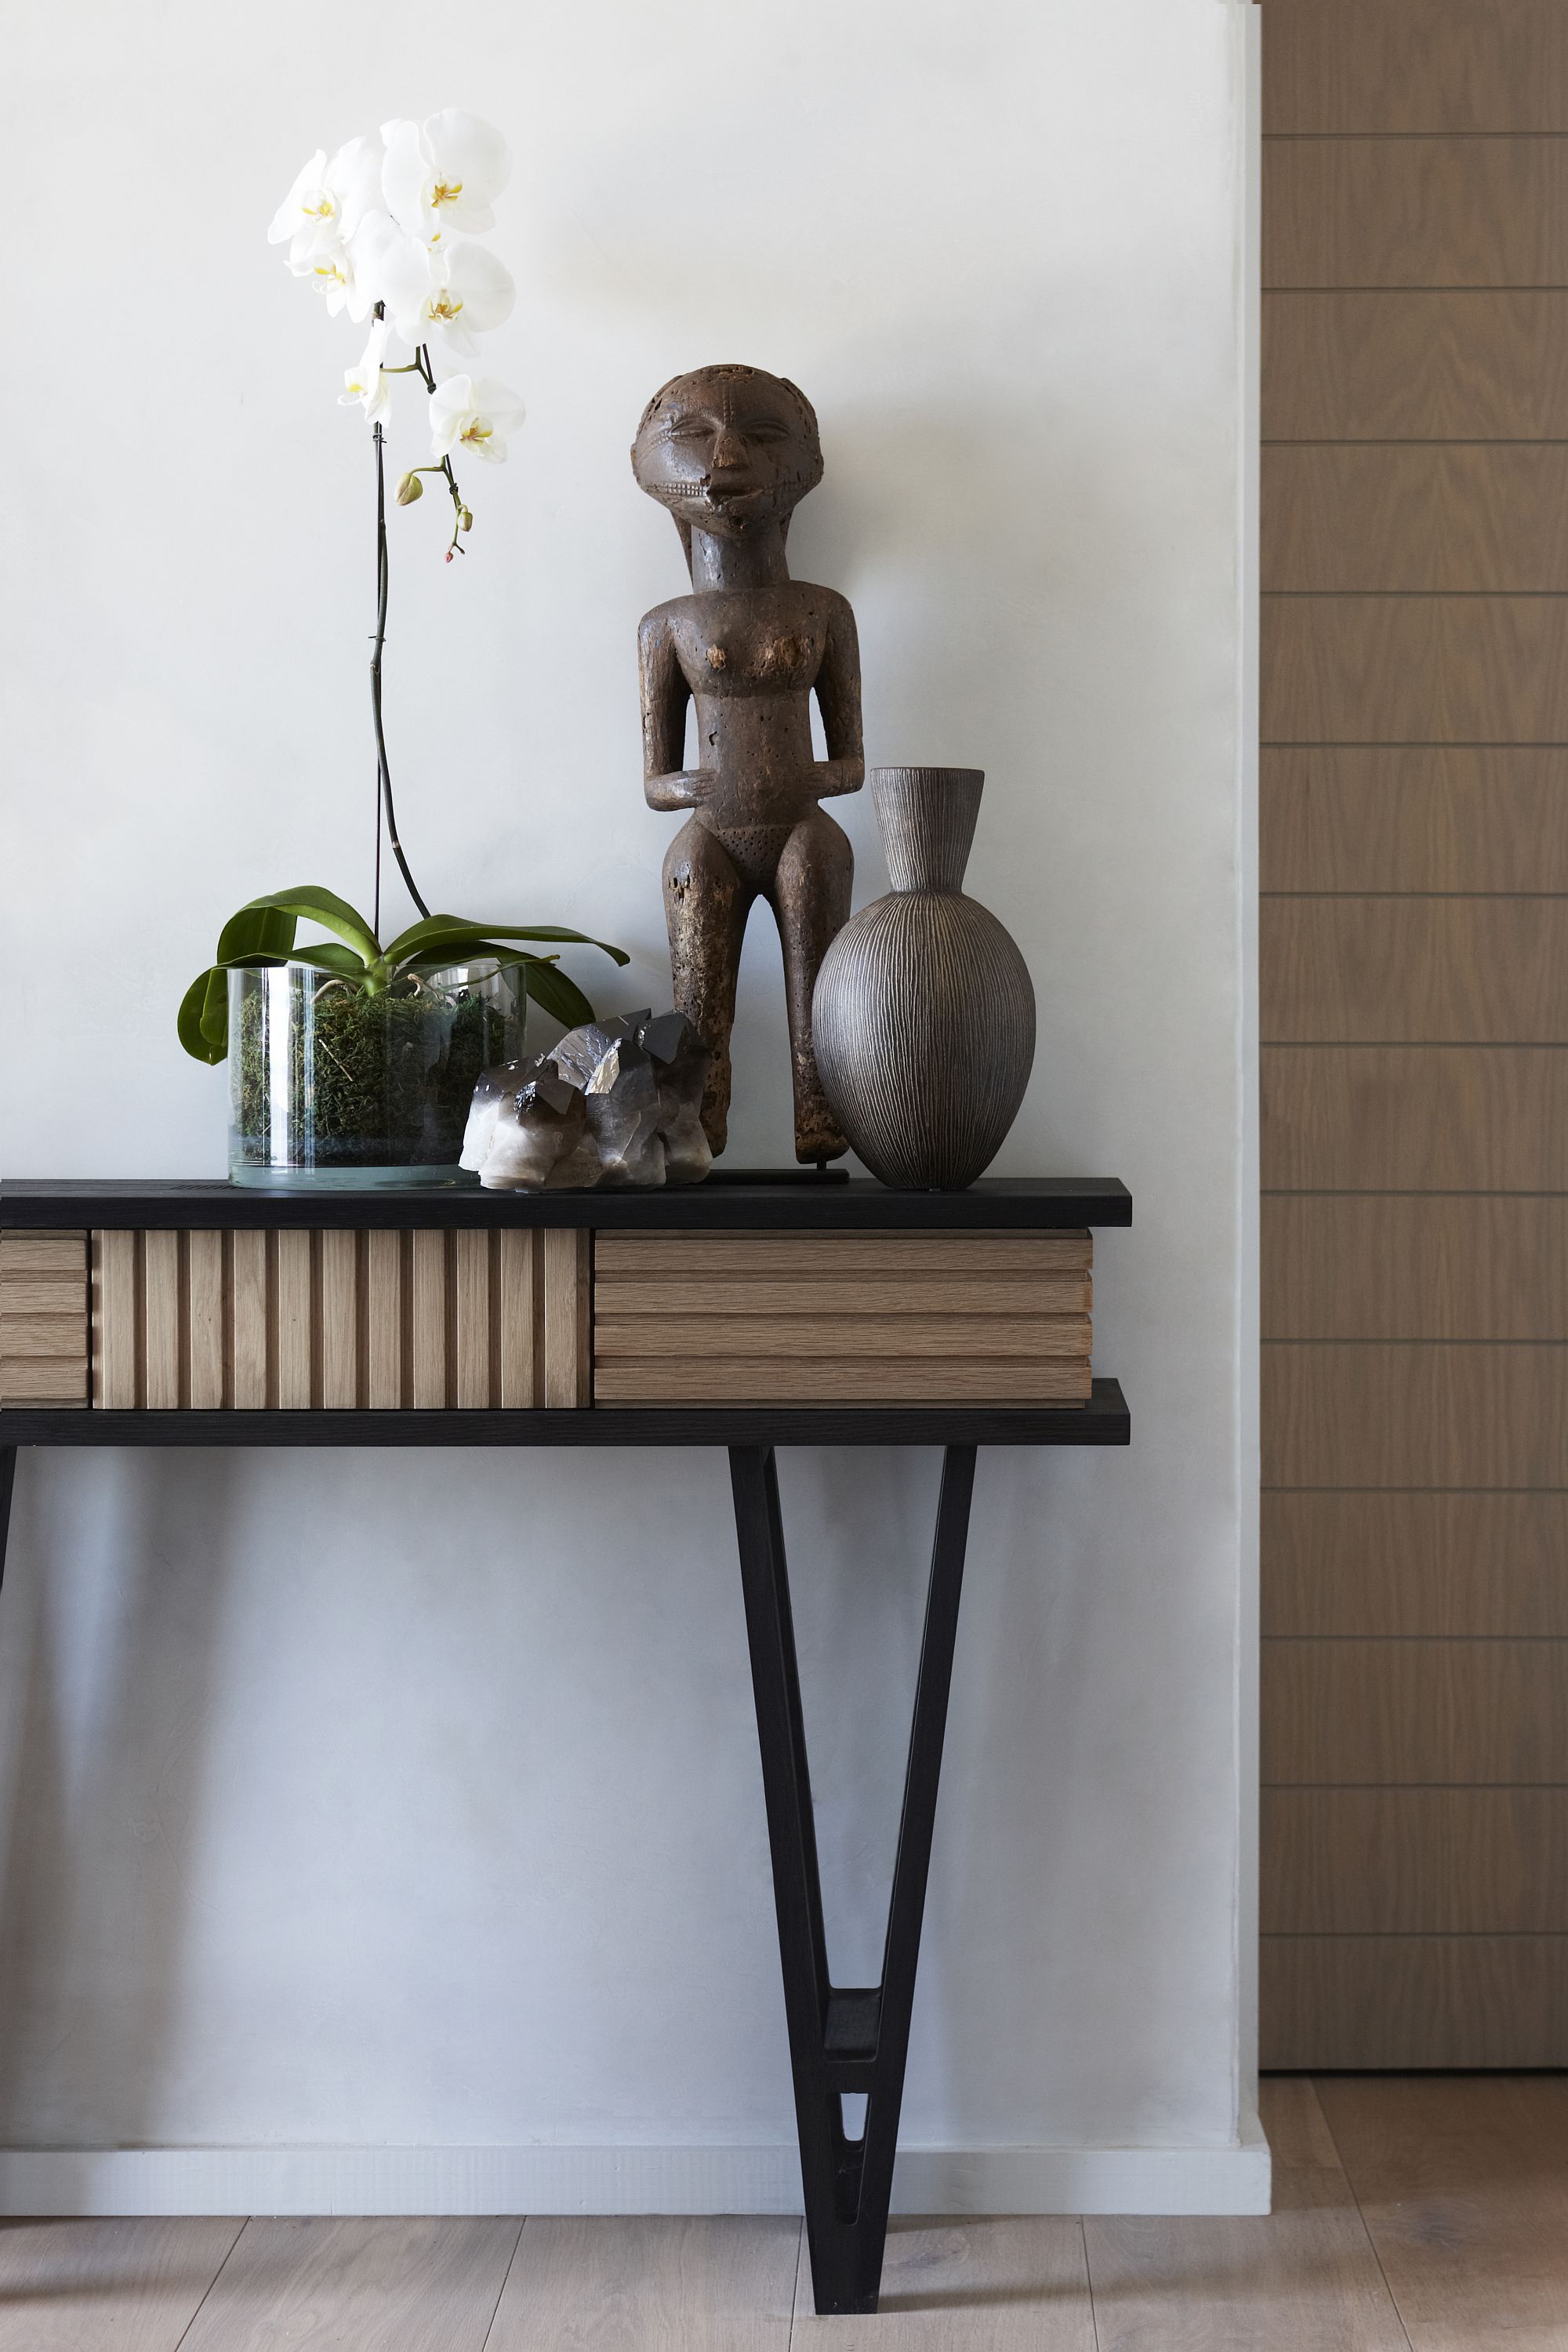 Traditional-African-design-finds-new-expression-in-the-minimal-backdrop